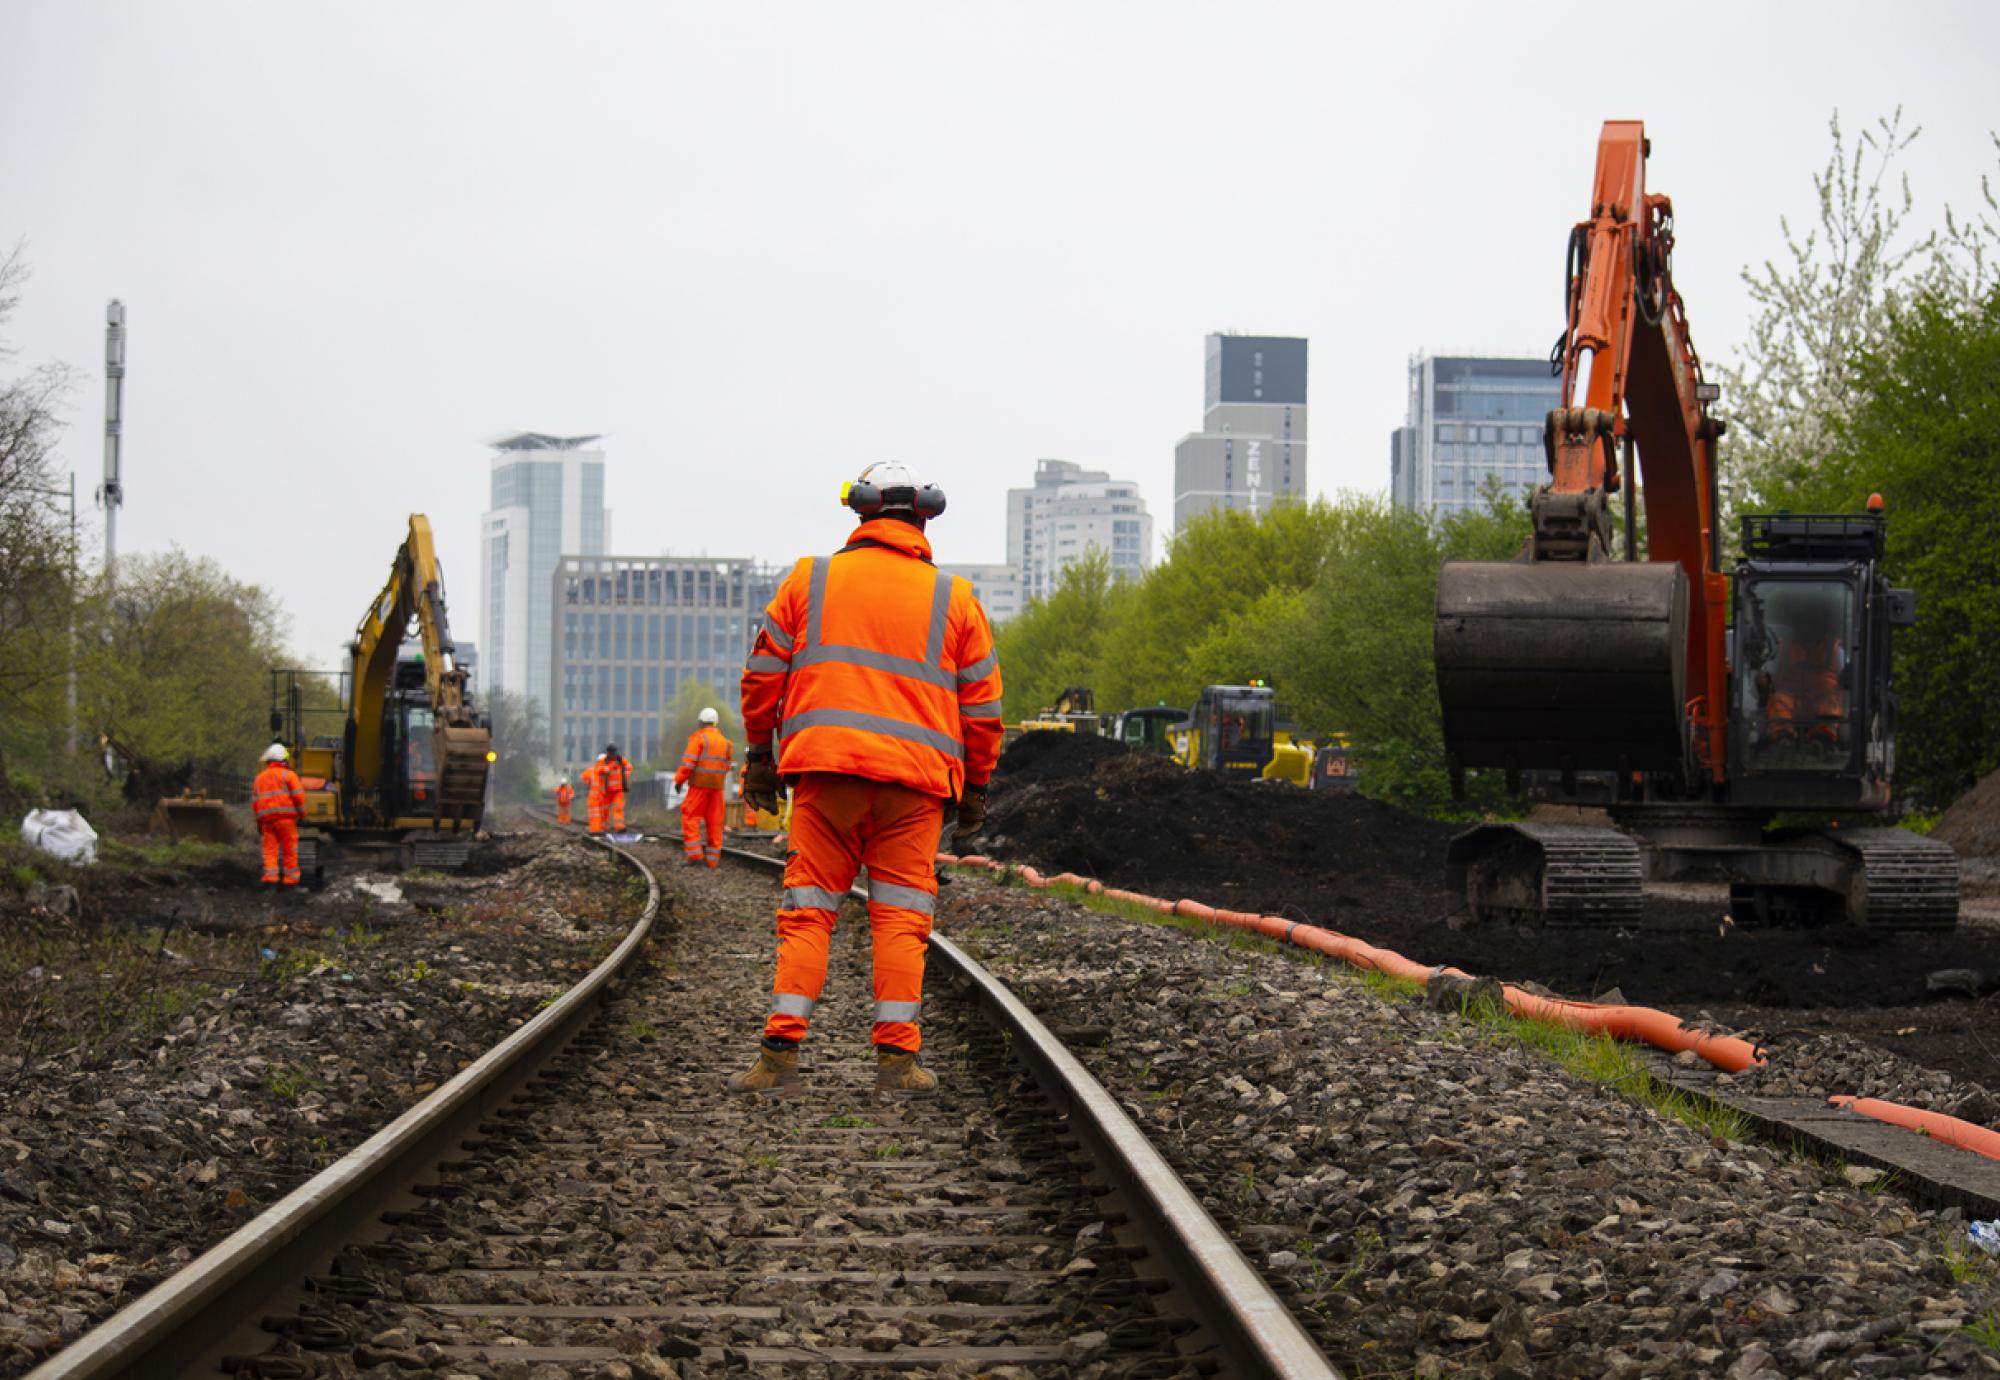 The Confidence in rail industry at five-year low, RIA survey finds